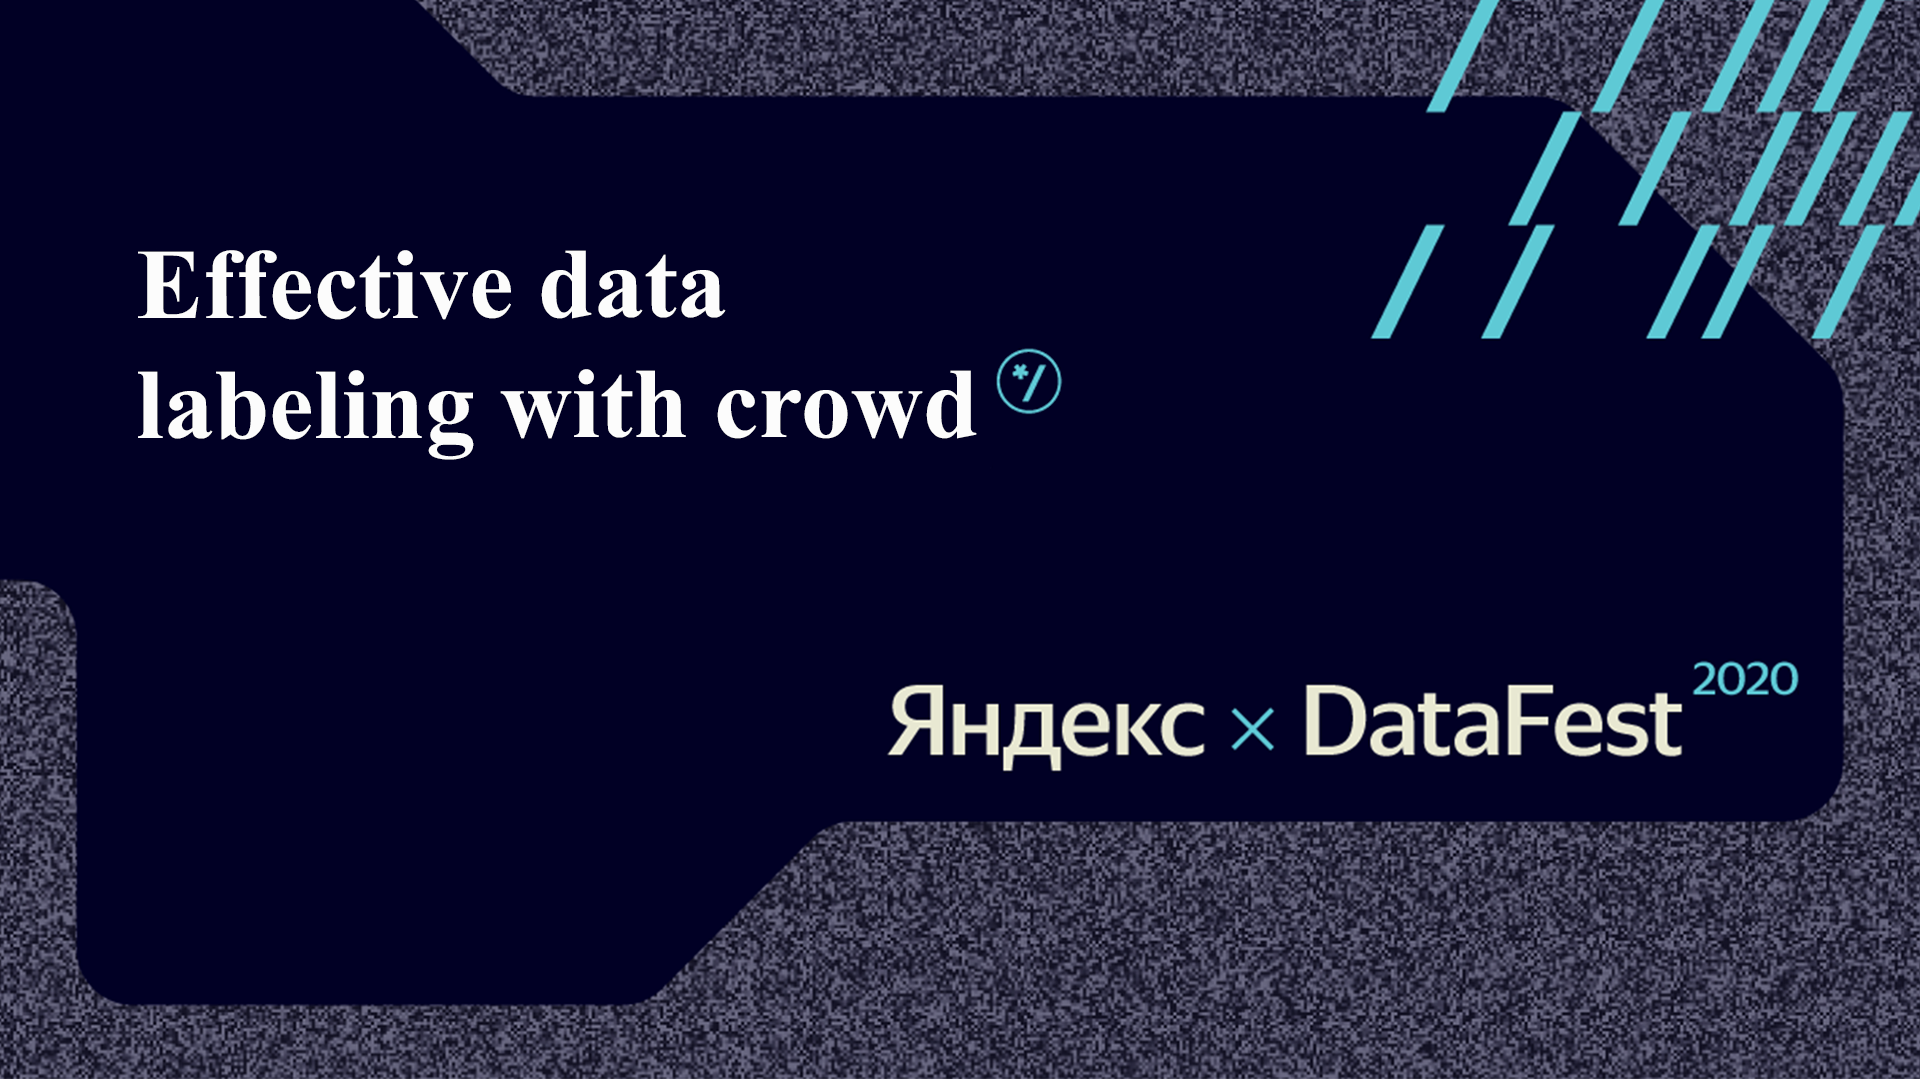 Яндекс. Effective data labeling with crowd